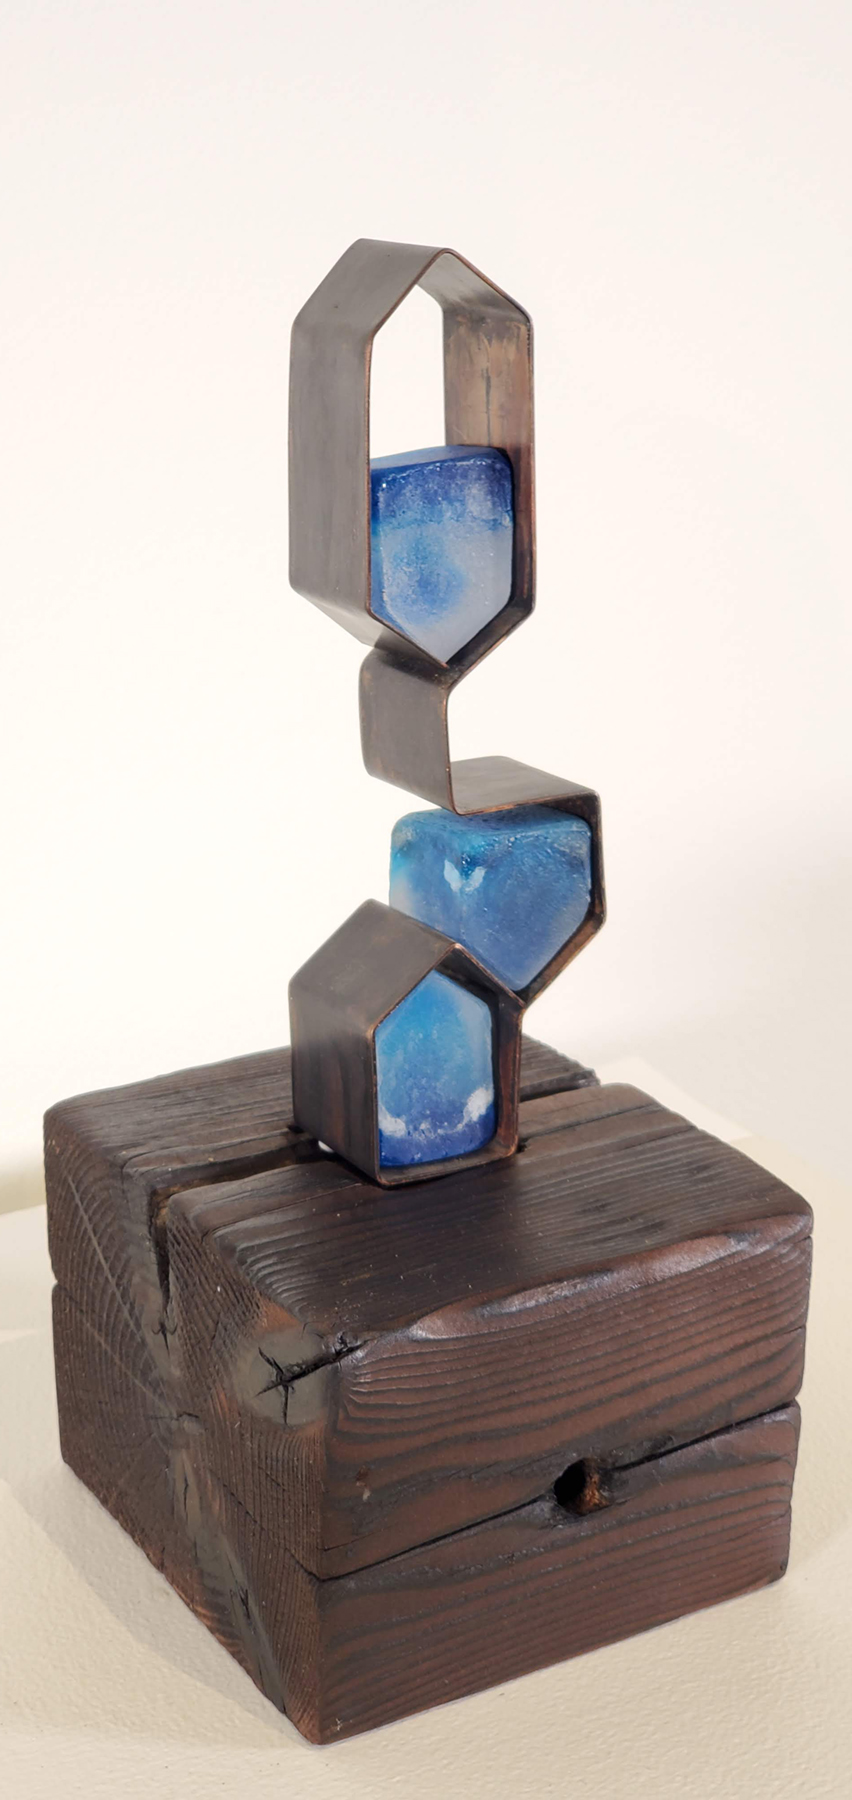 Three house-shaped blue cast glass structures nested in a copper sculpture. Image courtesy of the artist